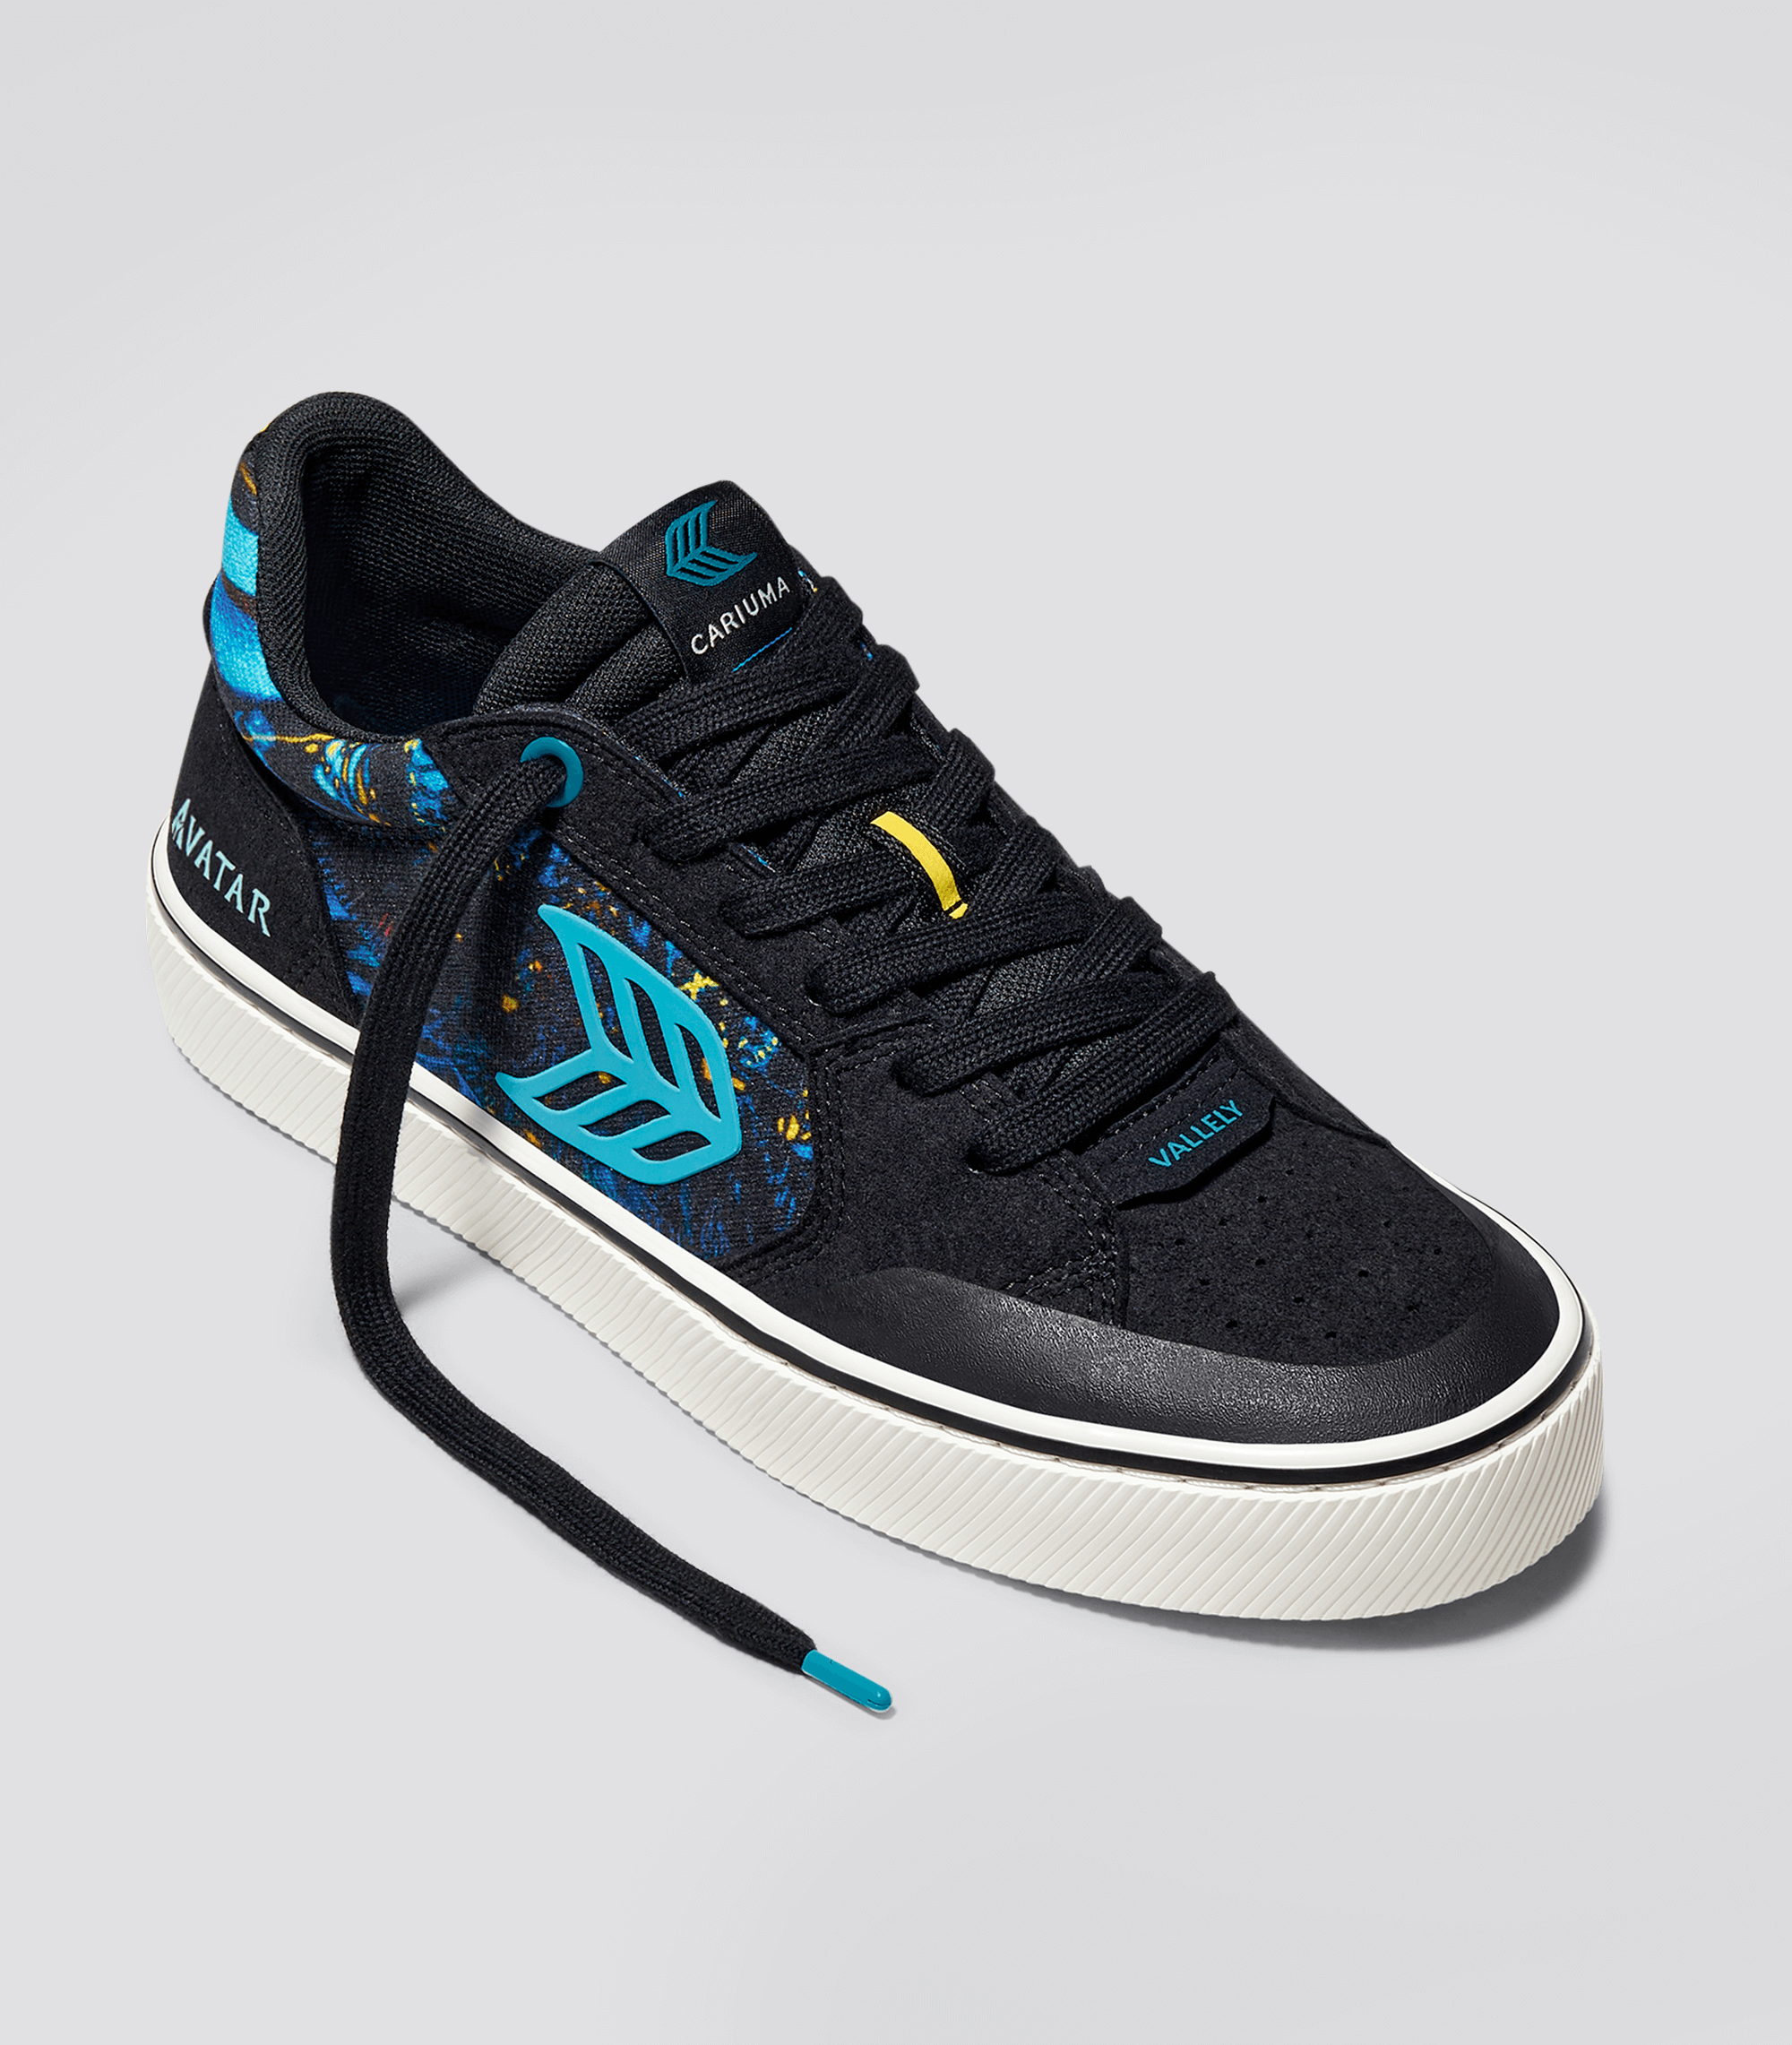 CARIUMA: Men's Skateboarding Shoes By Mike Vallely | VALLELY PRO